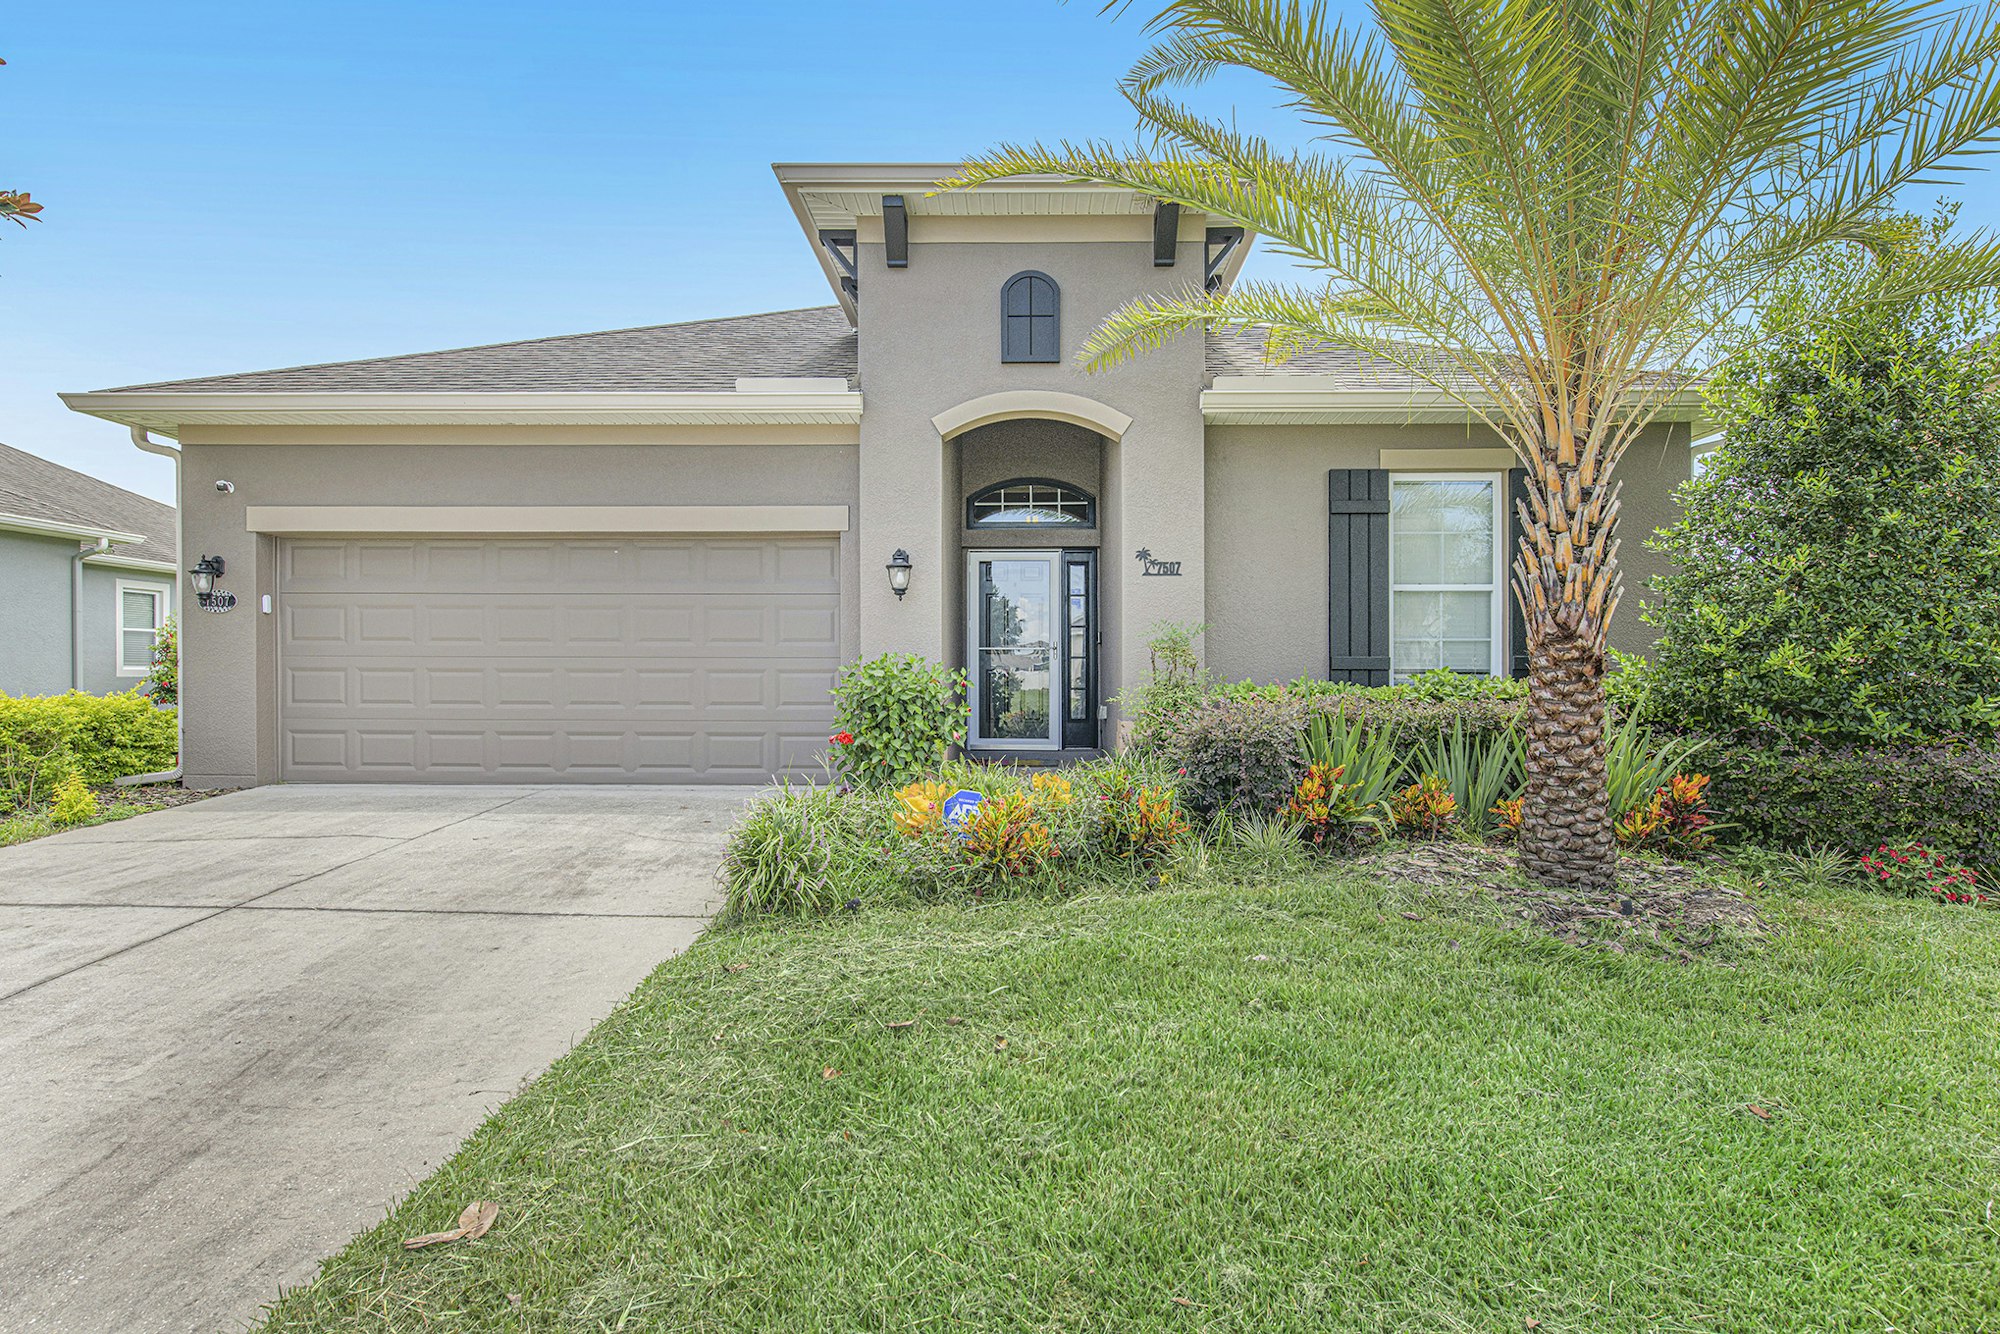 Photo 1 of 16 - 7507 Atwood Dr, Wesley Chapel, FL 33545